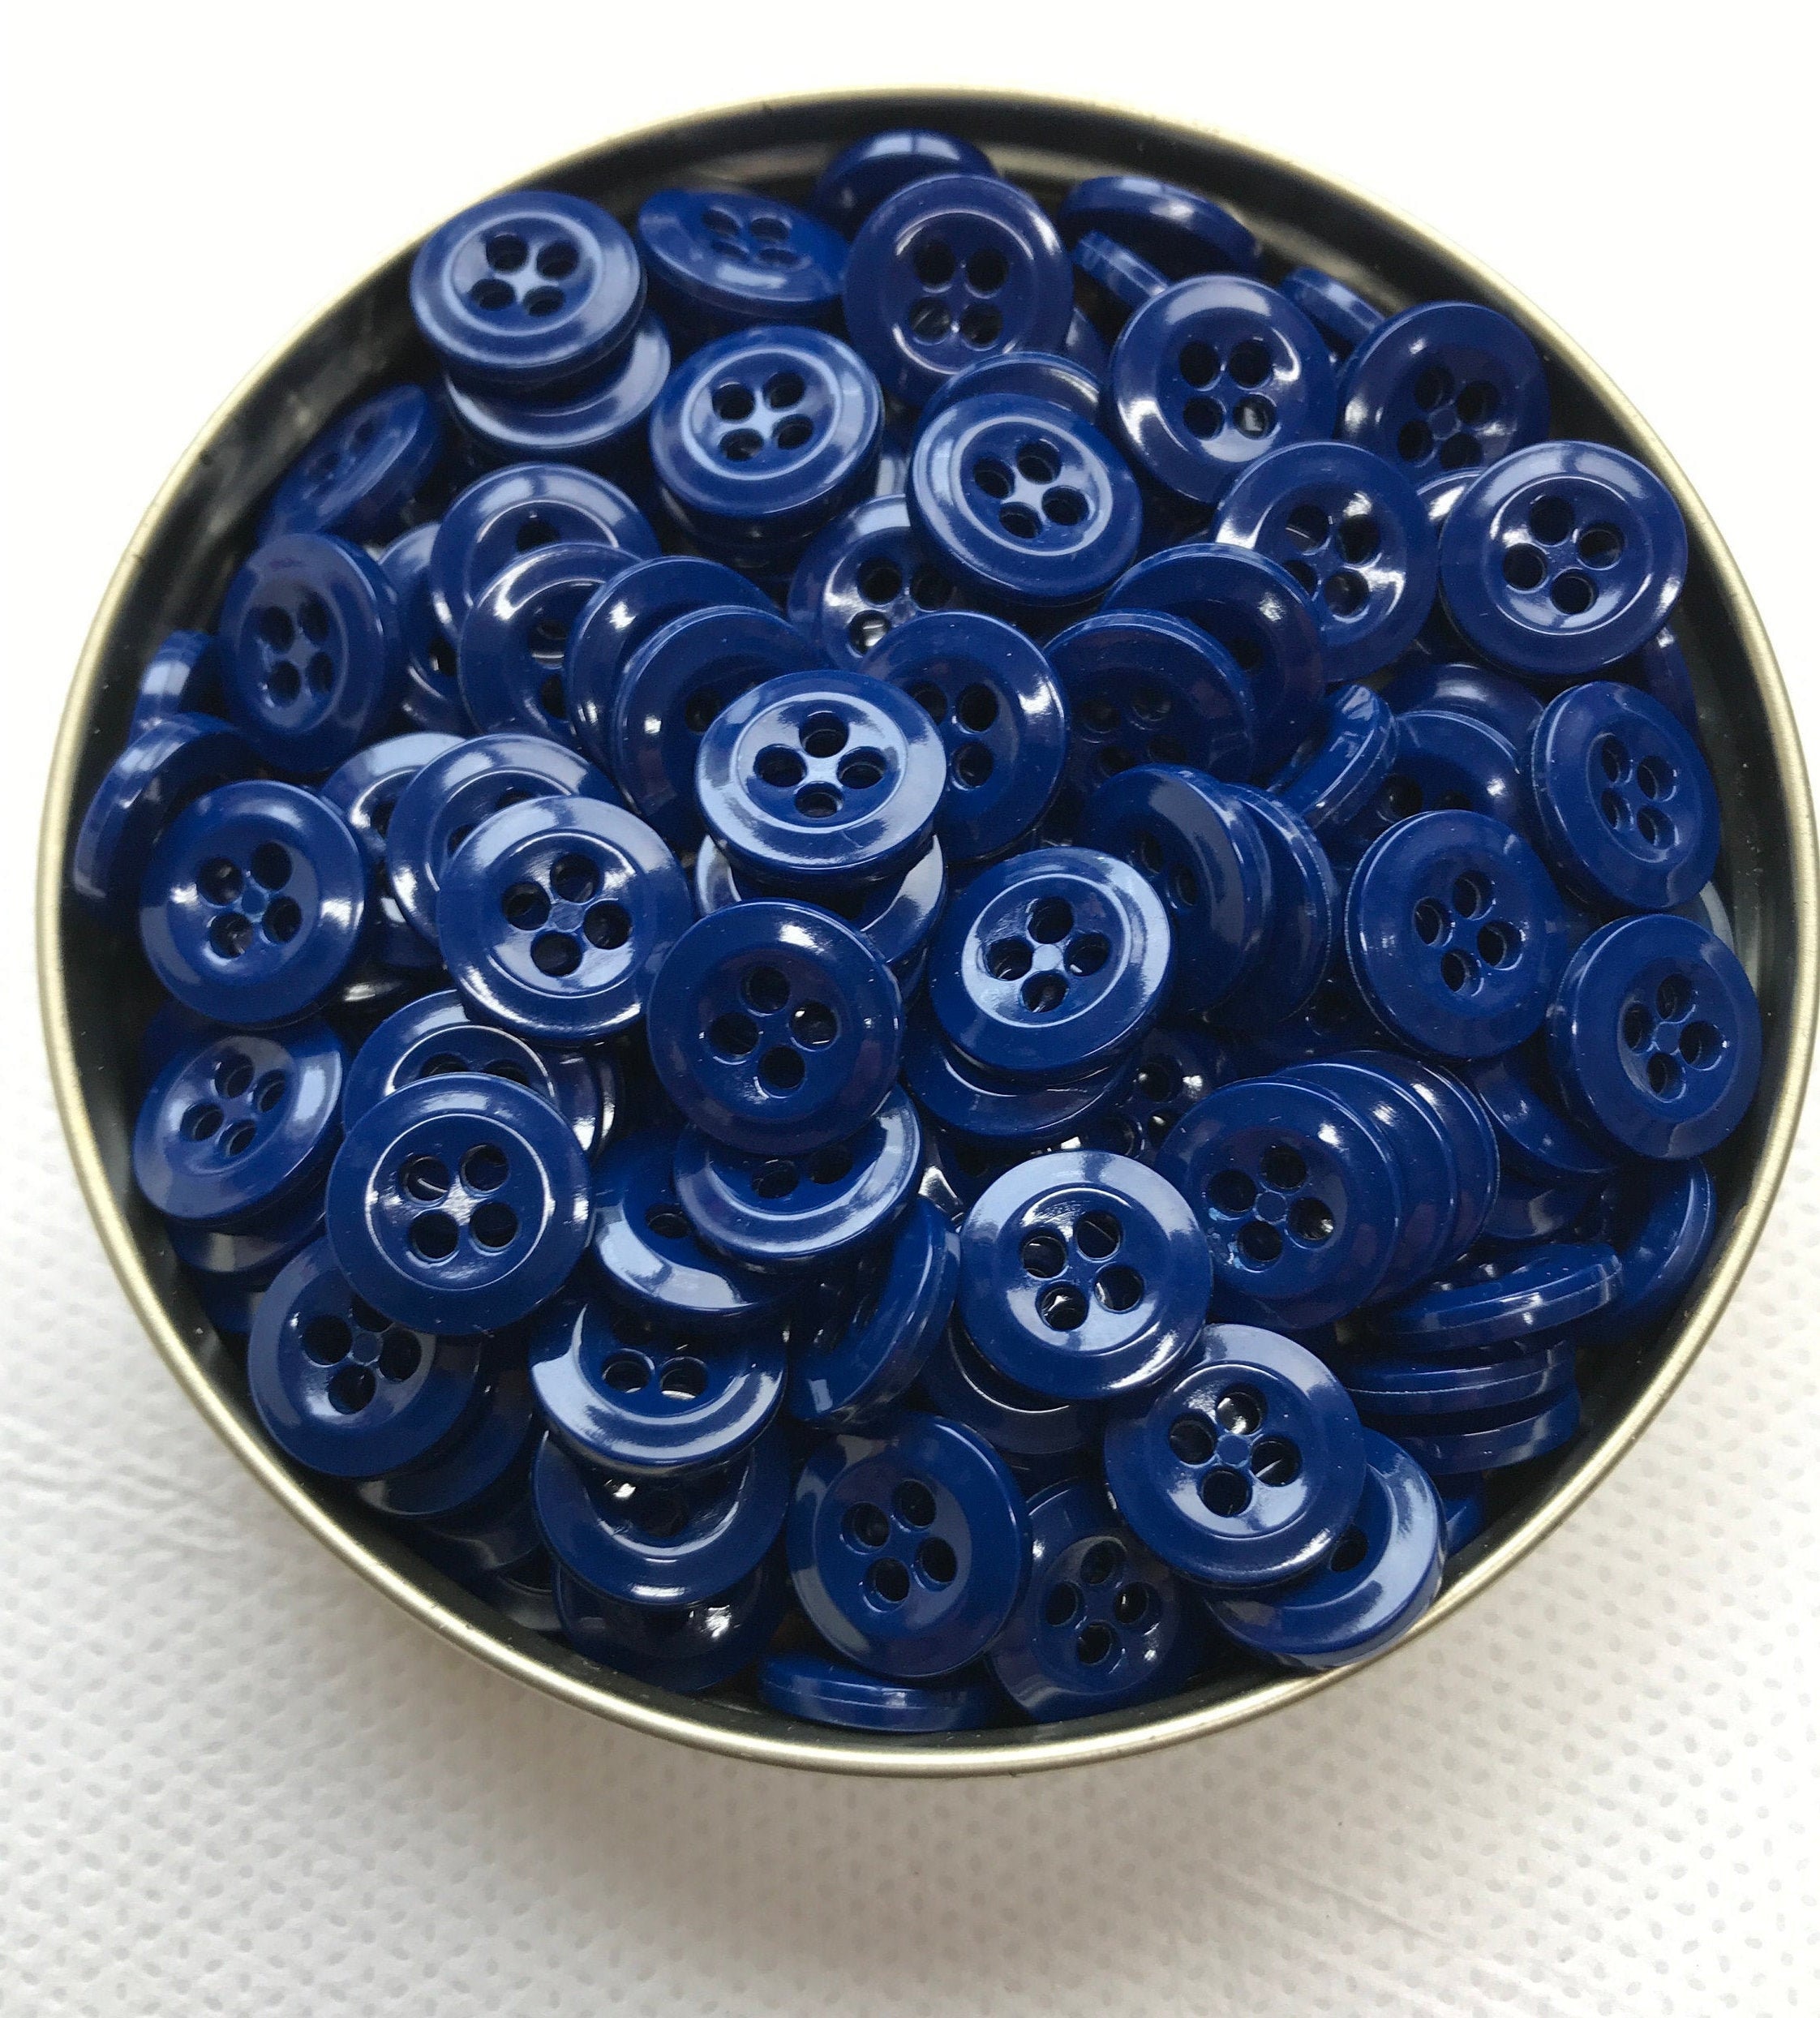 Royal Blue Buttons, Blue Buttons 4 Hole Lot of 10-50-100-500 Buttons  Internal Colored 1/2 12.4mm 